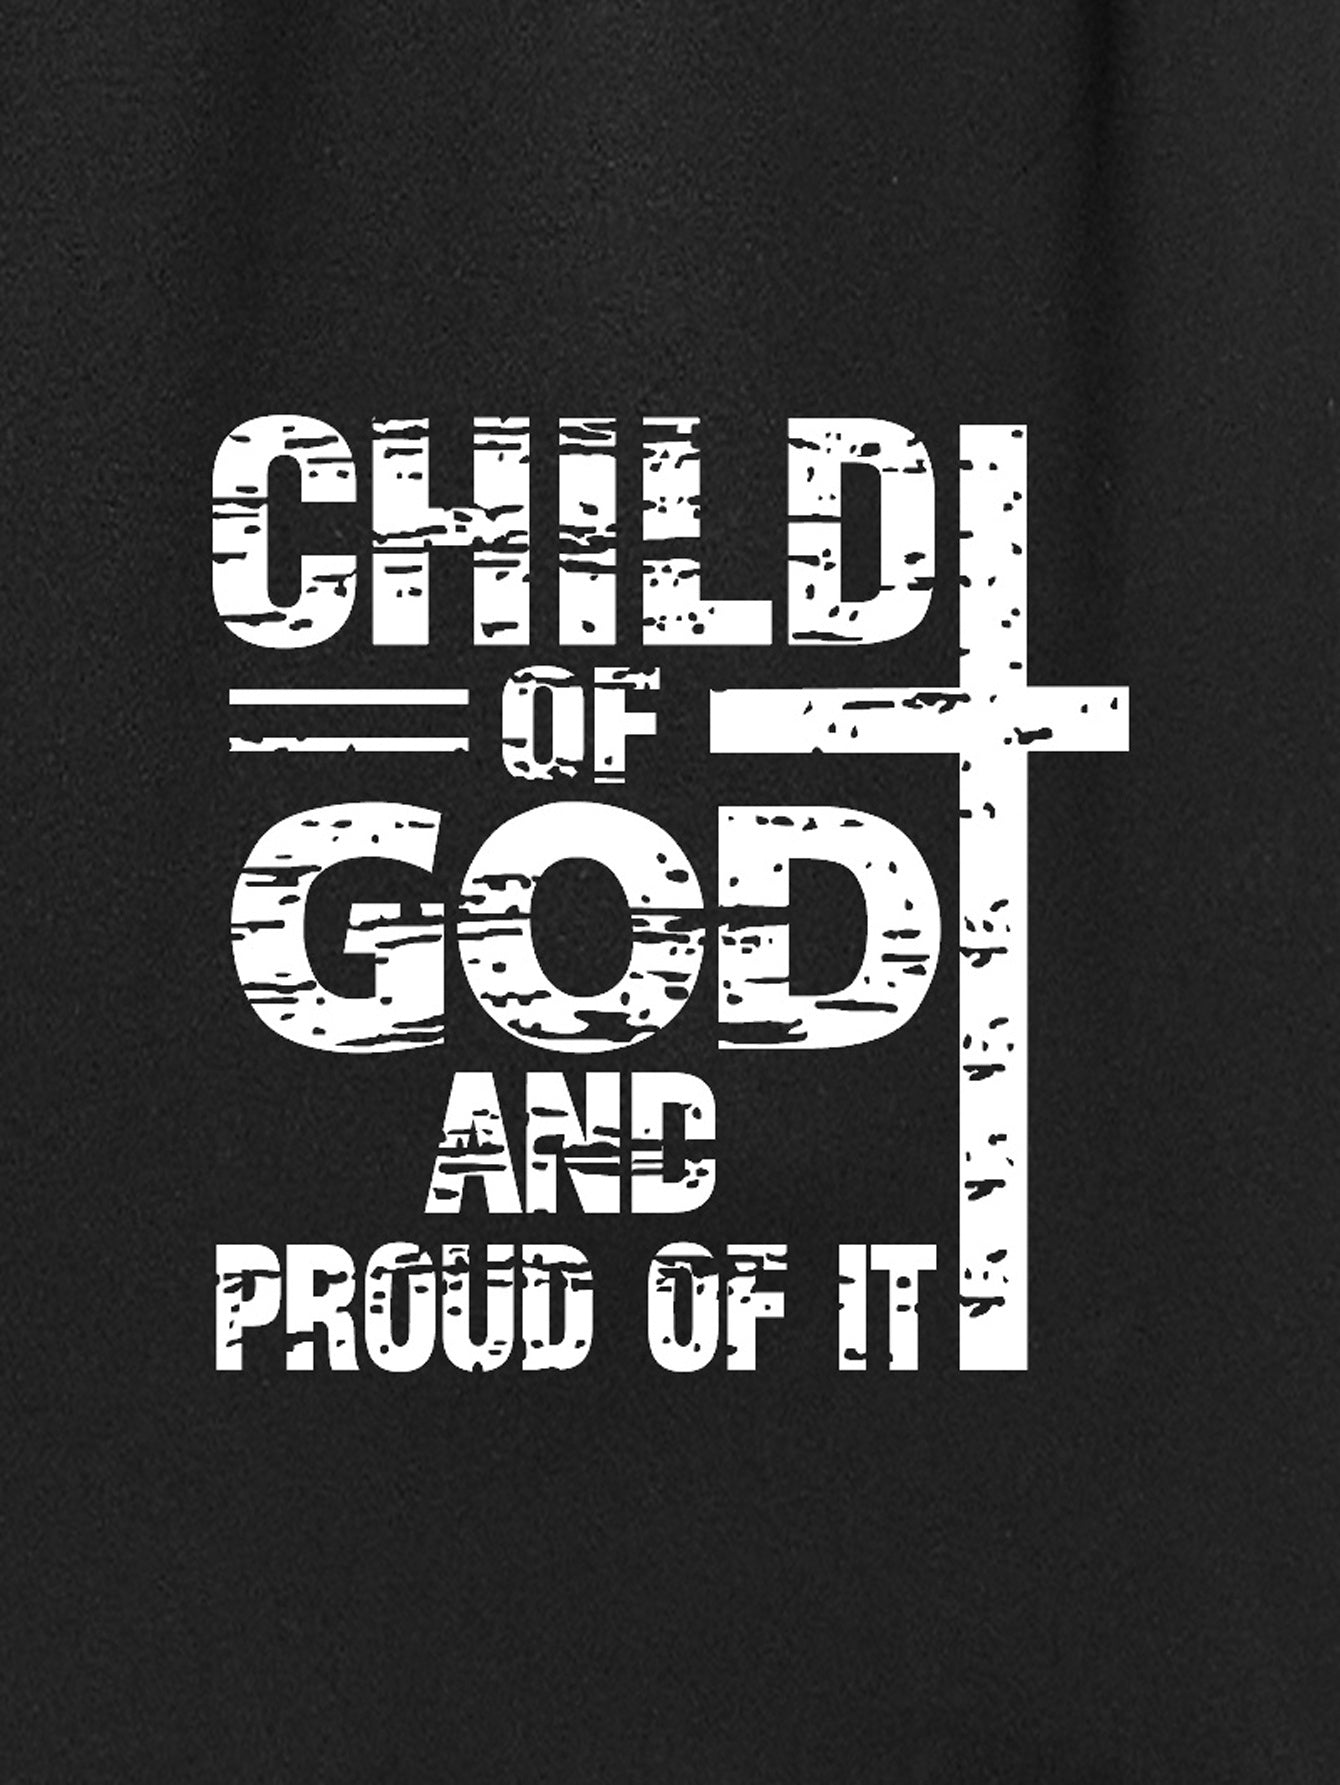 Child Of God And Proud Of It Men's Christian Shorts claimedbygoddesigns